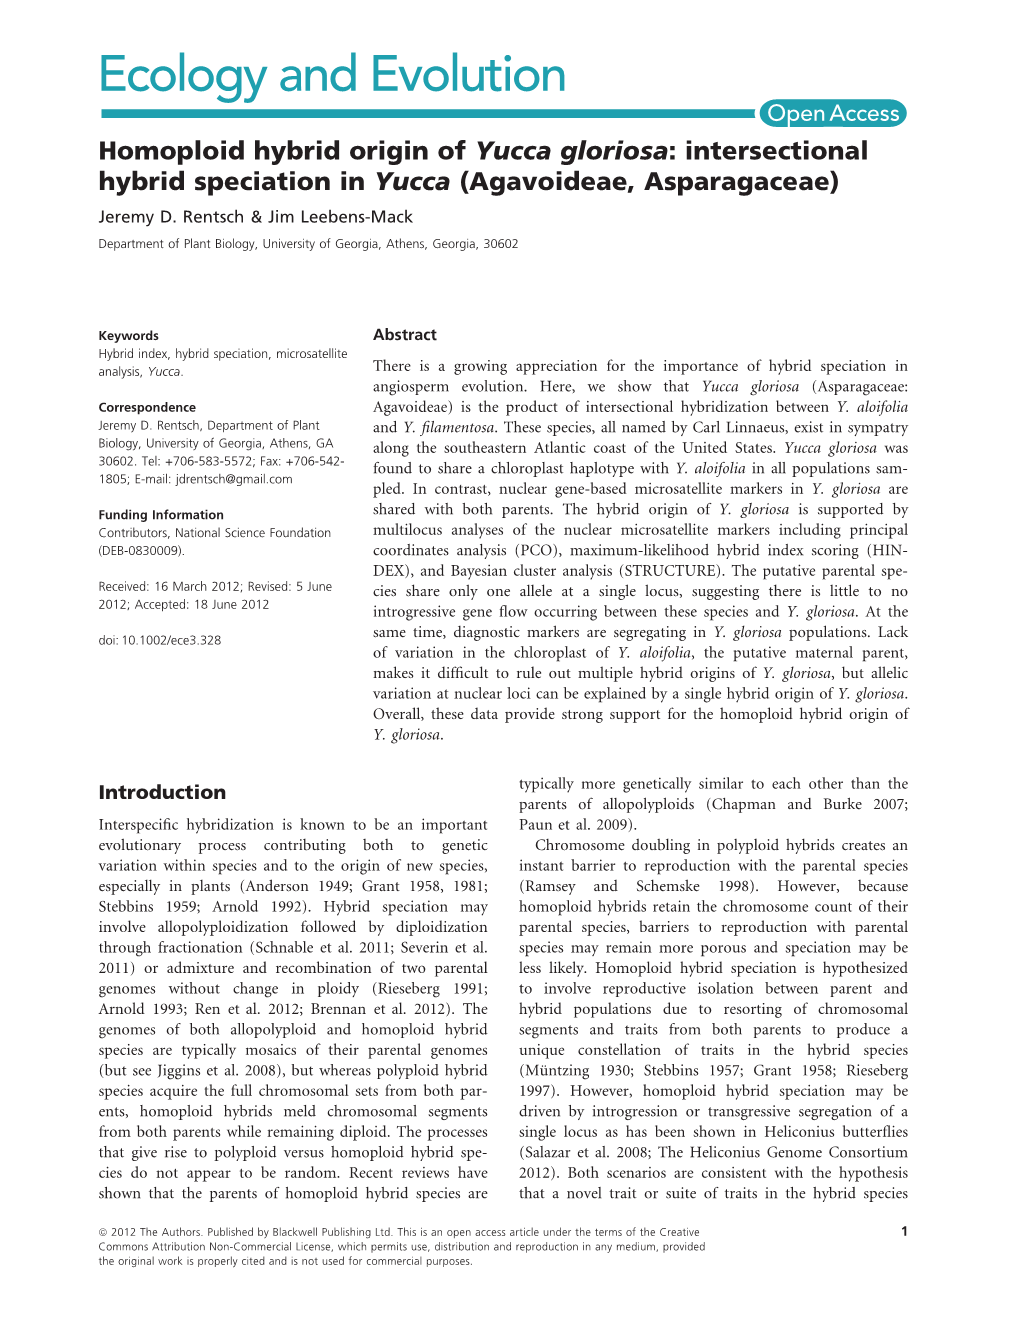 Homoploid Hybrid Origin of Yucca Gloriosa: Intersectional Hybrid Speciation in Yucca (Agavoideae, Asparagaceae) Jeremy D